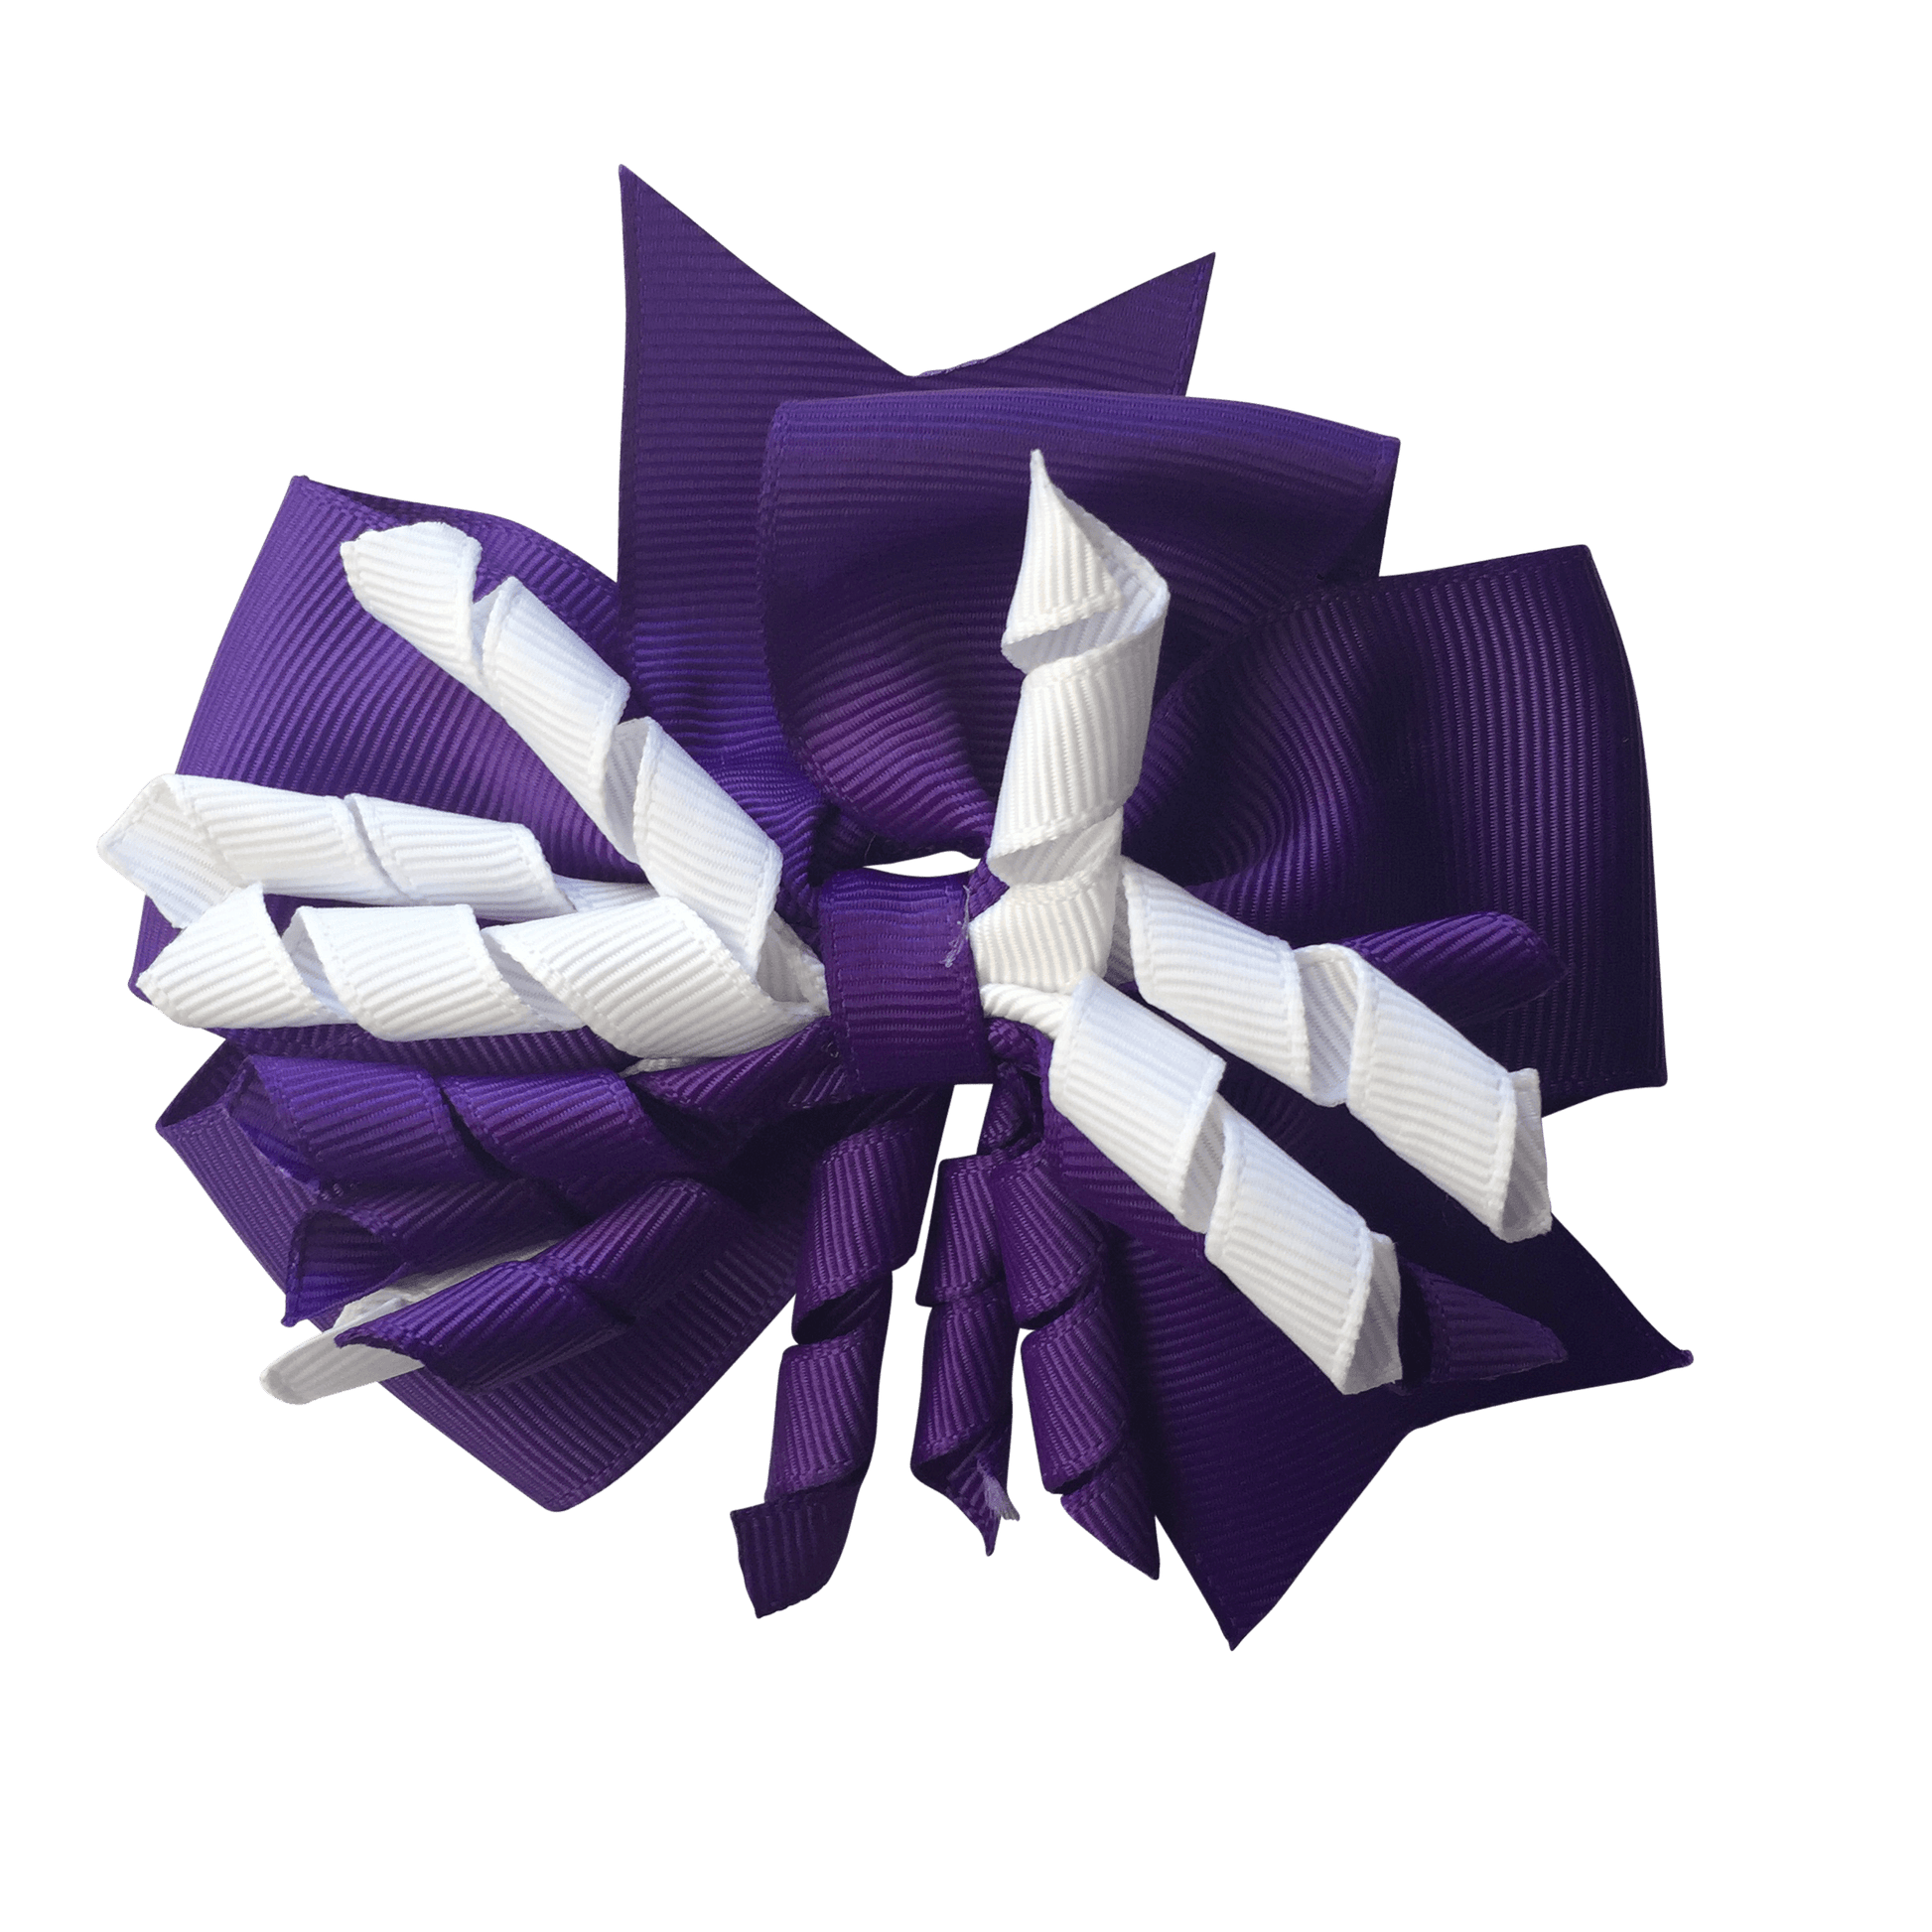 Purple & White Hair Accessories - Assorted Hair Accessories - School Uniform Hair Accessories - Ponytails and Fairytales